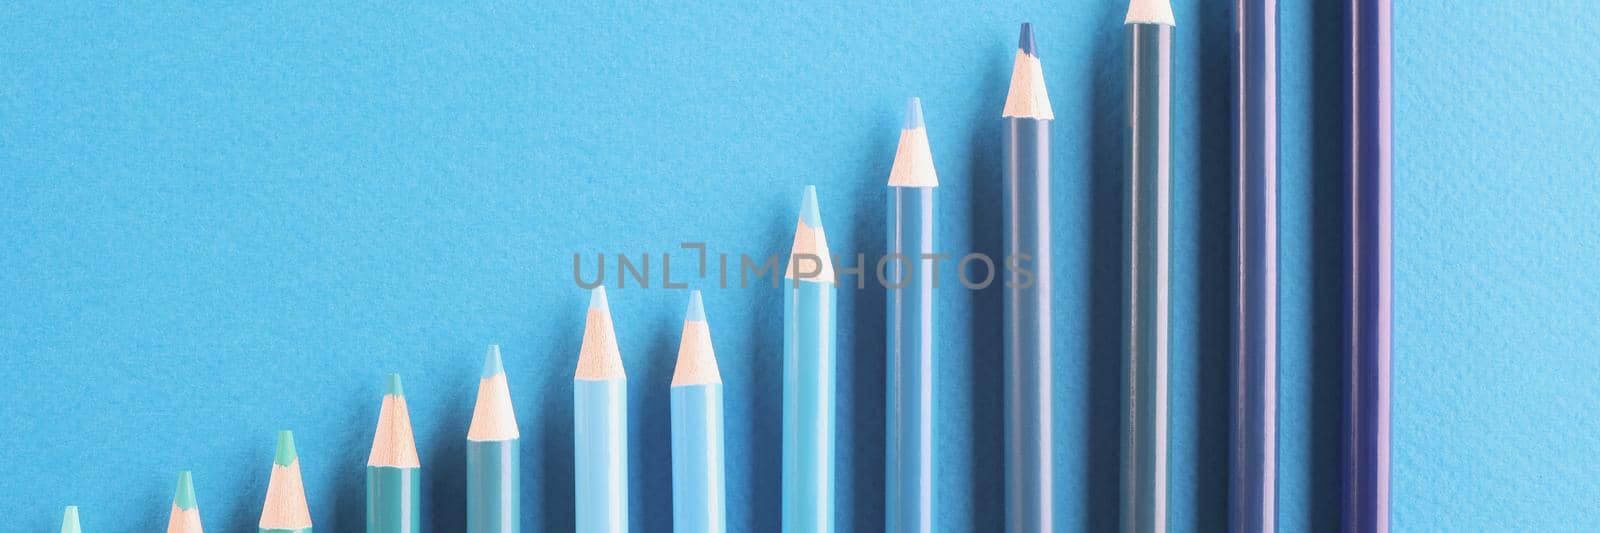 Top view of blue colored pencil set arranged in increasing way on surface and not exactly in row. Tool for draw your dreams, ideas and vision. Art concept